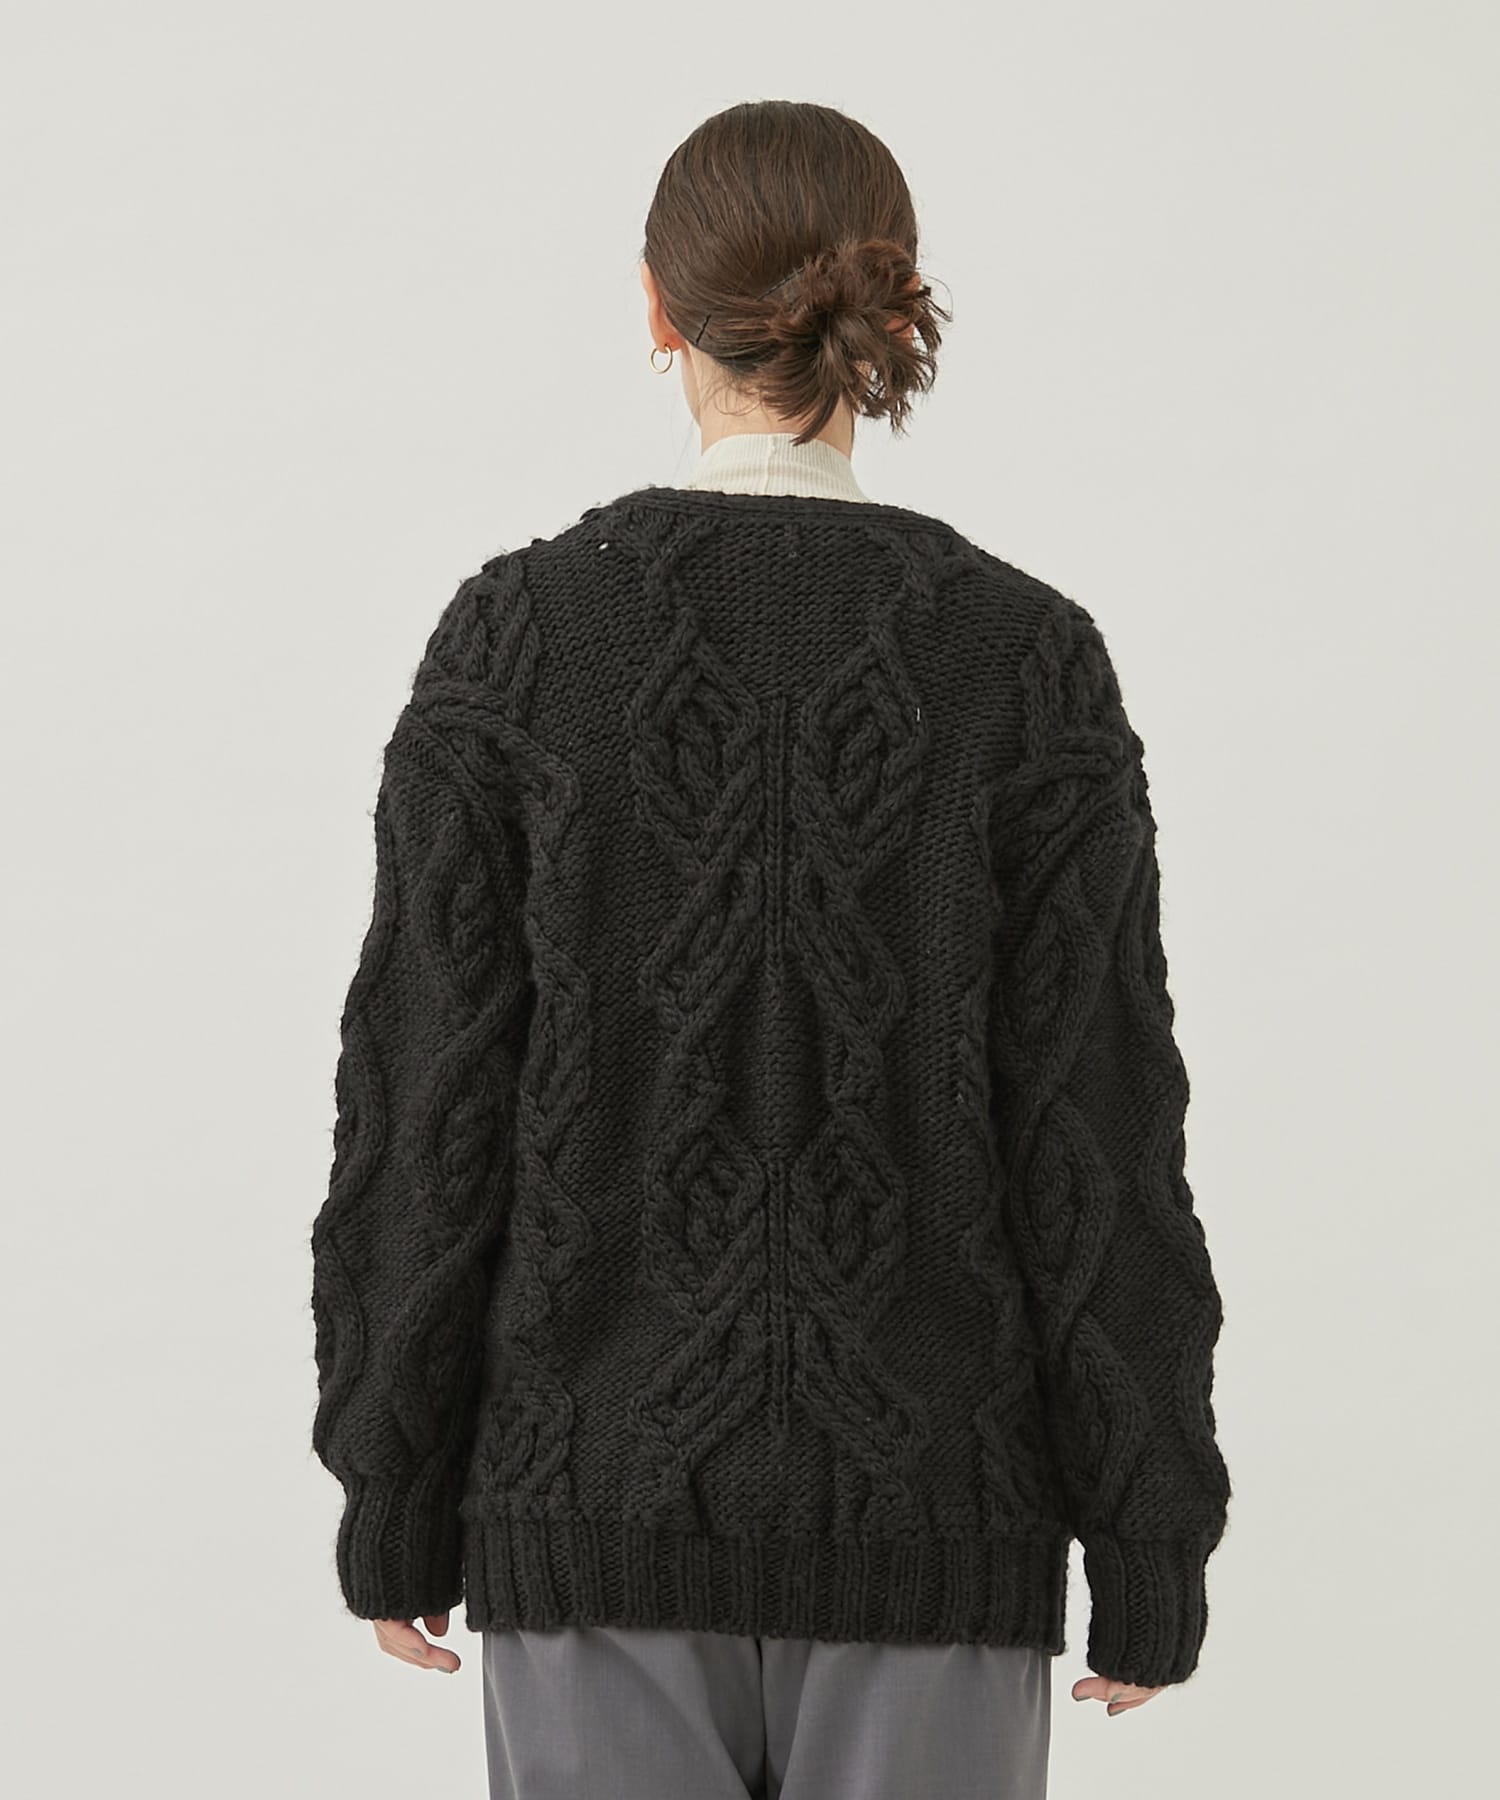 Deformtion Cable Knit Cardigan RUMCHE